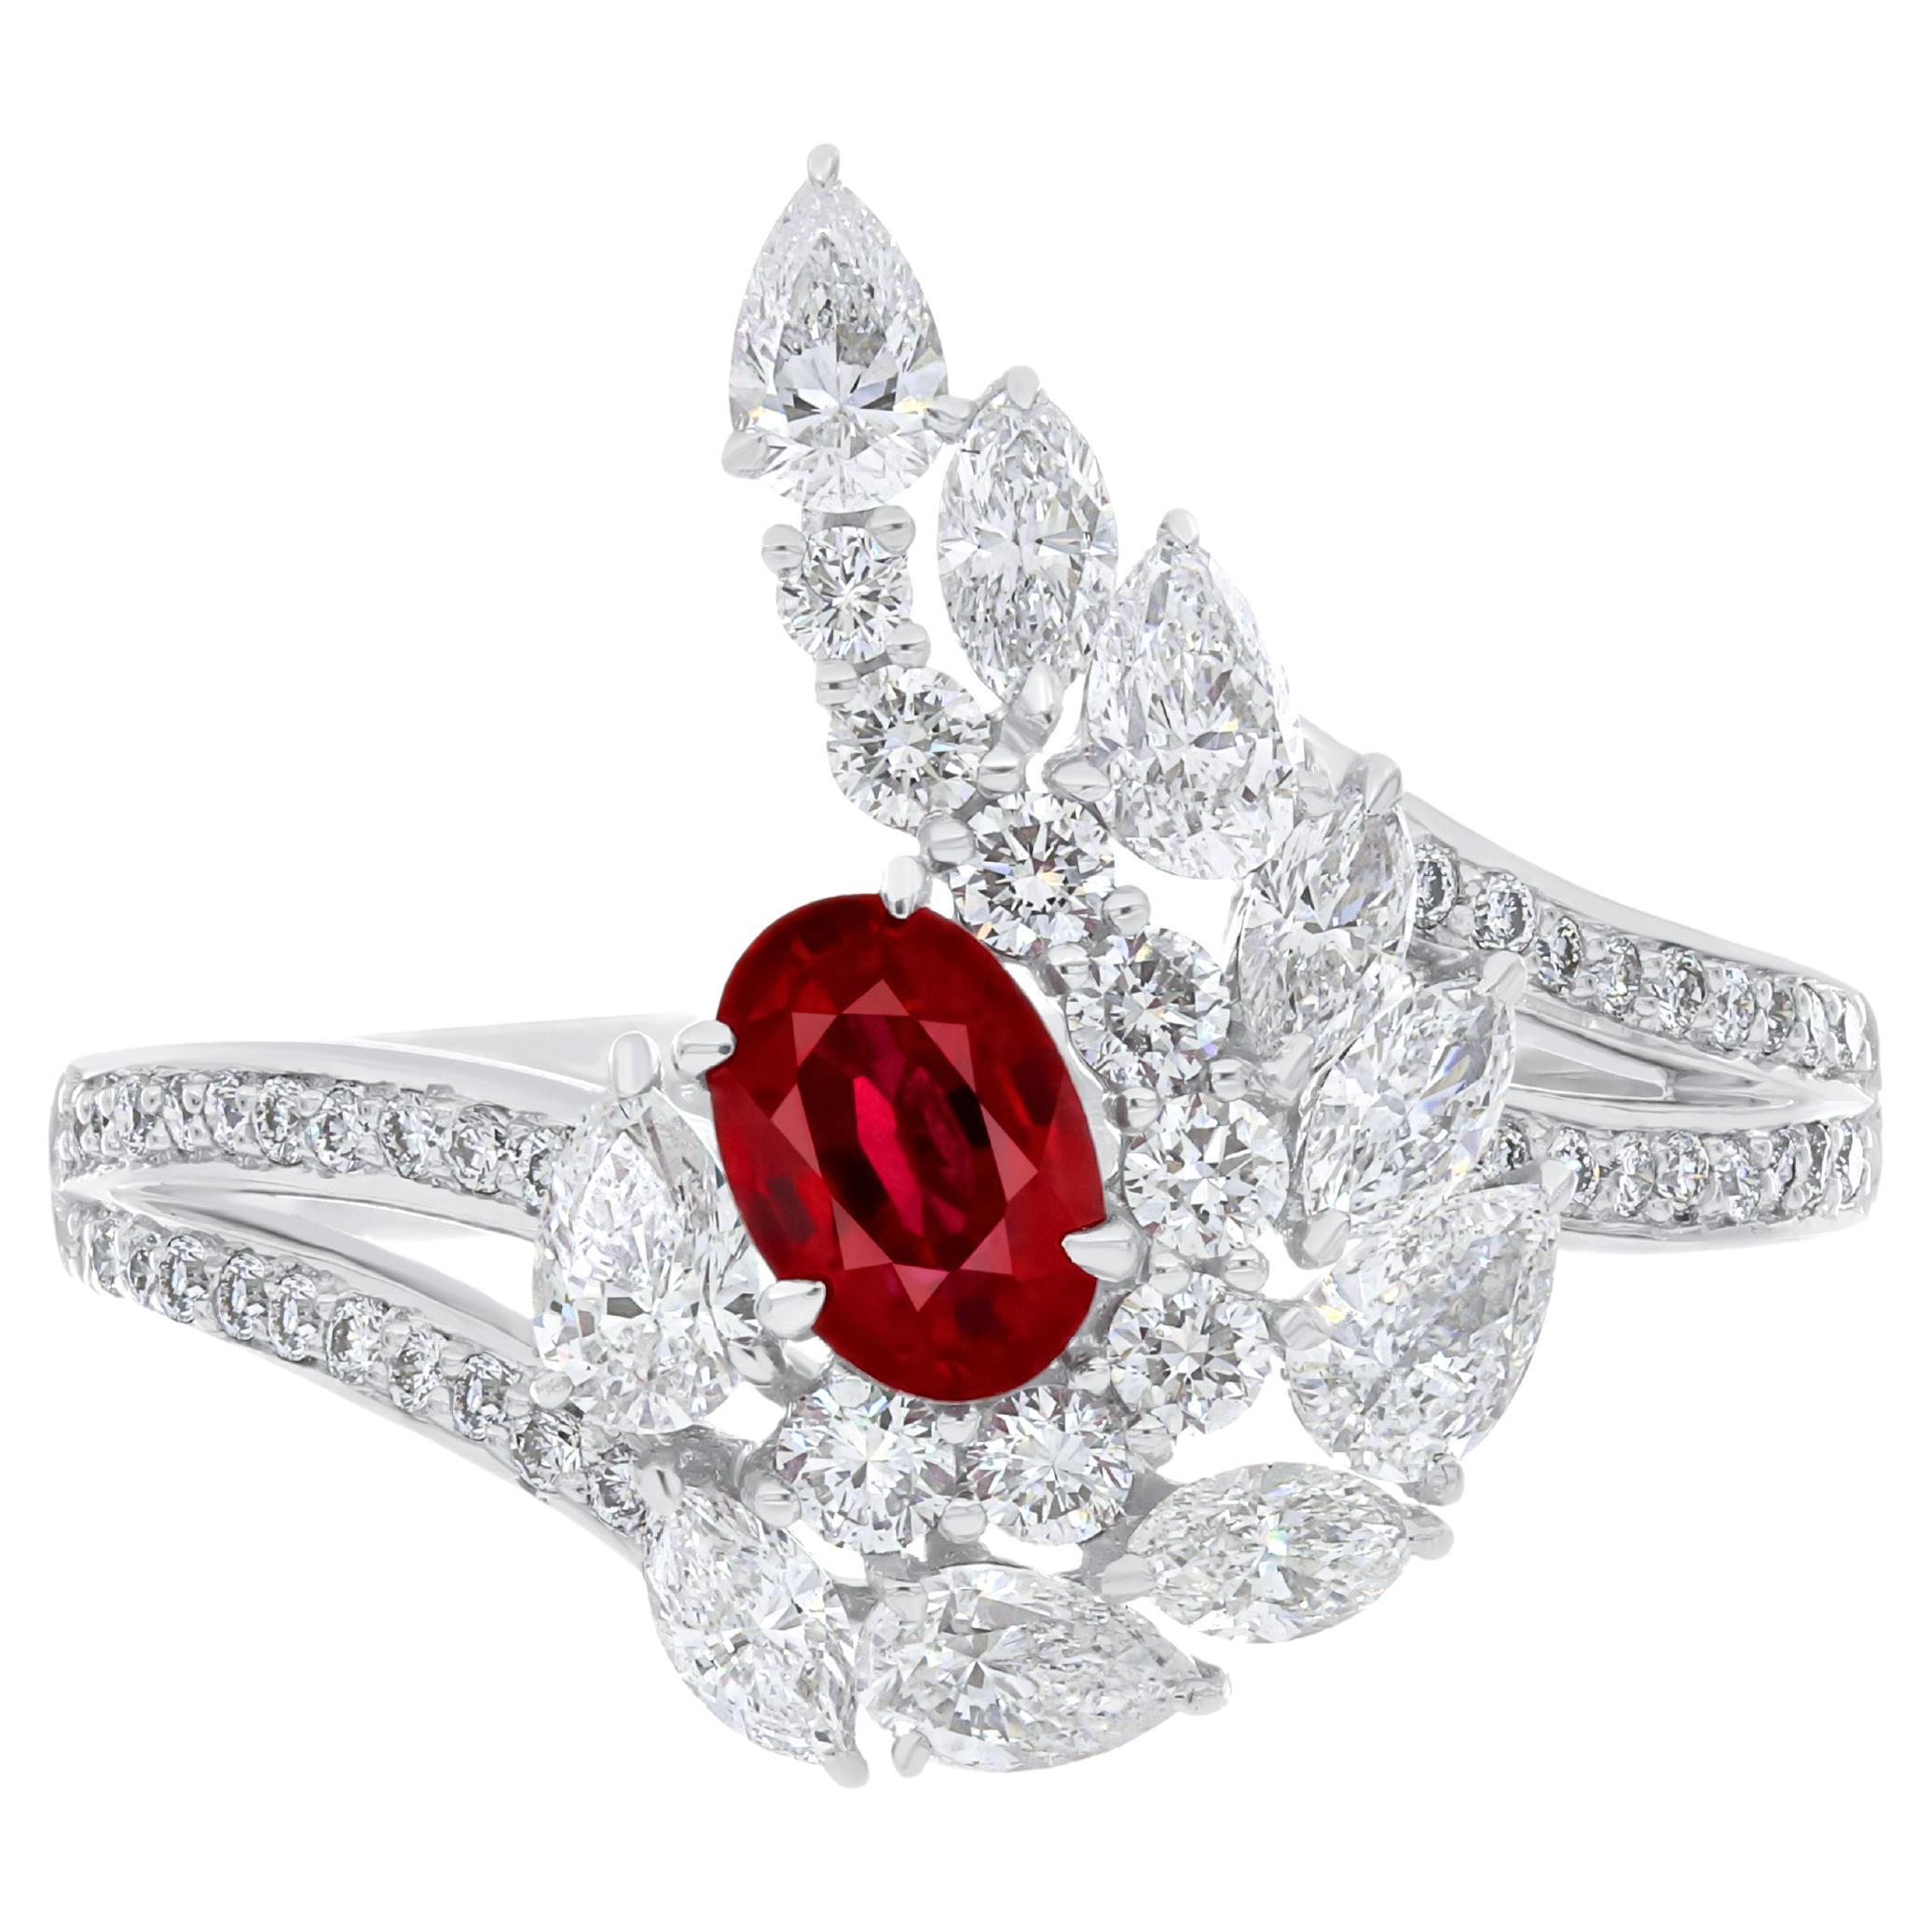 Ruby Burma and Diamond Studded Ring in 18 Karat White Gold